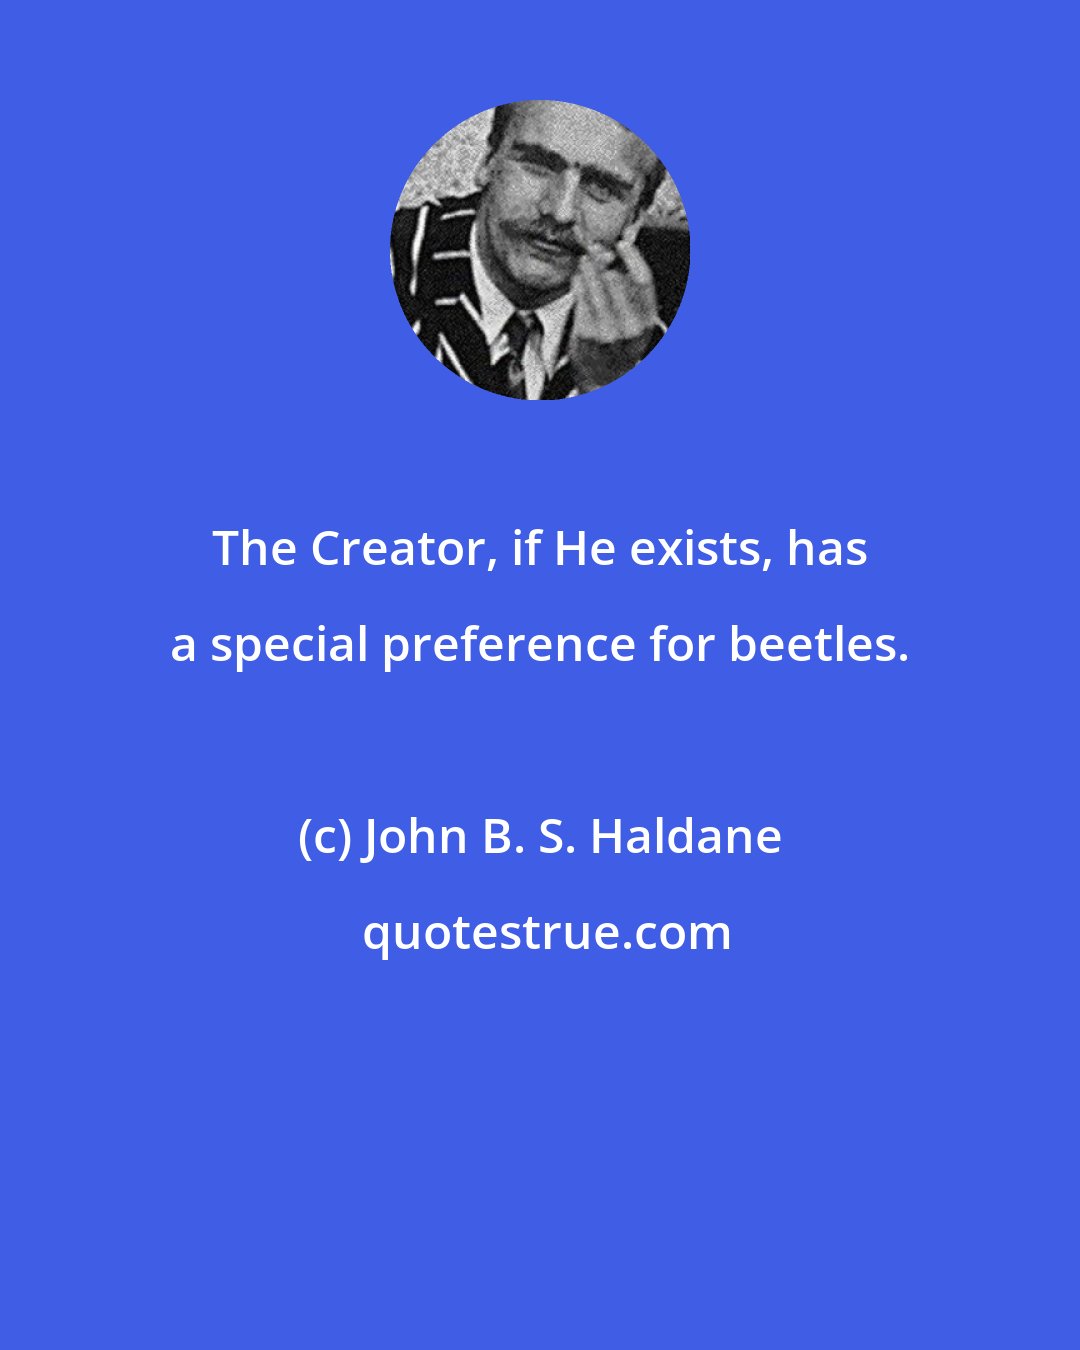 John B. S. Haldane: The Creator, if He exists, has a special preference for beetles.